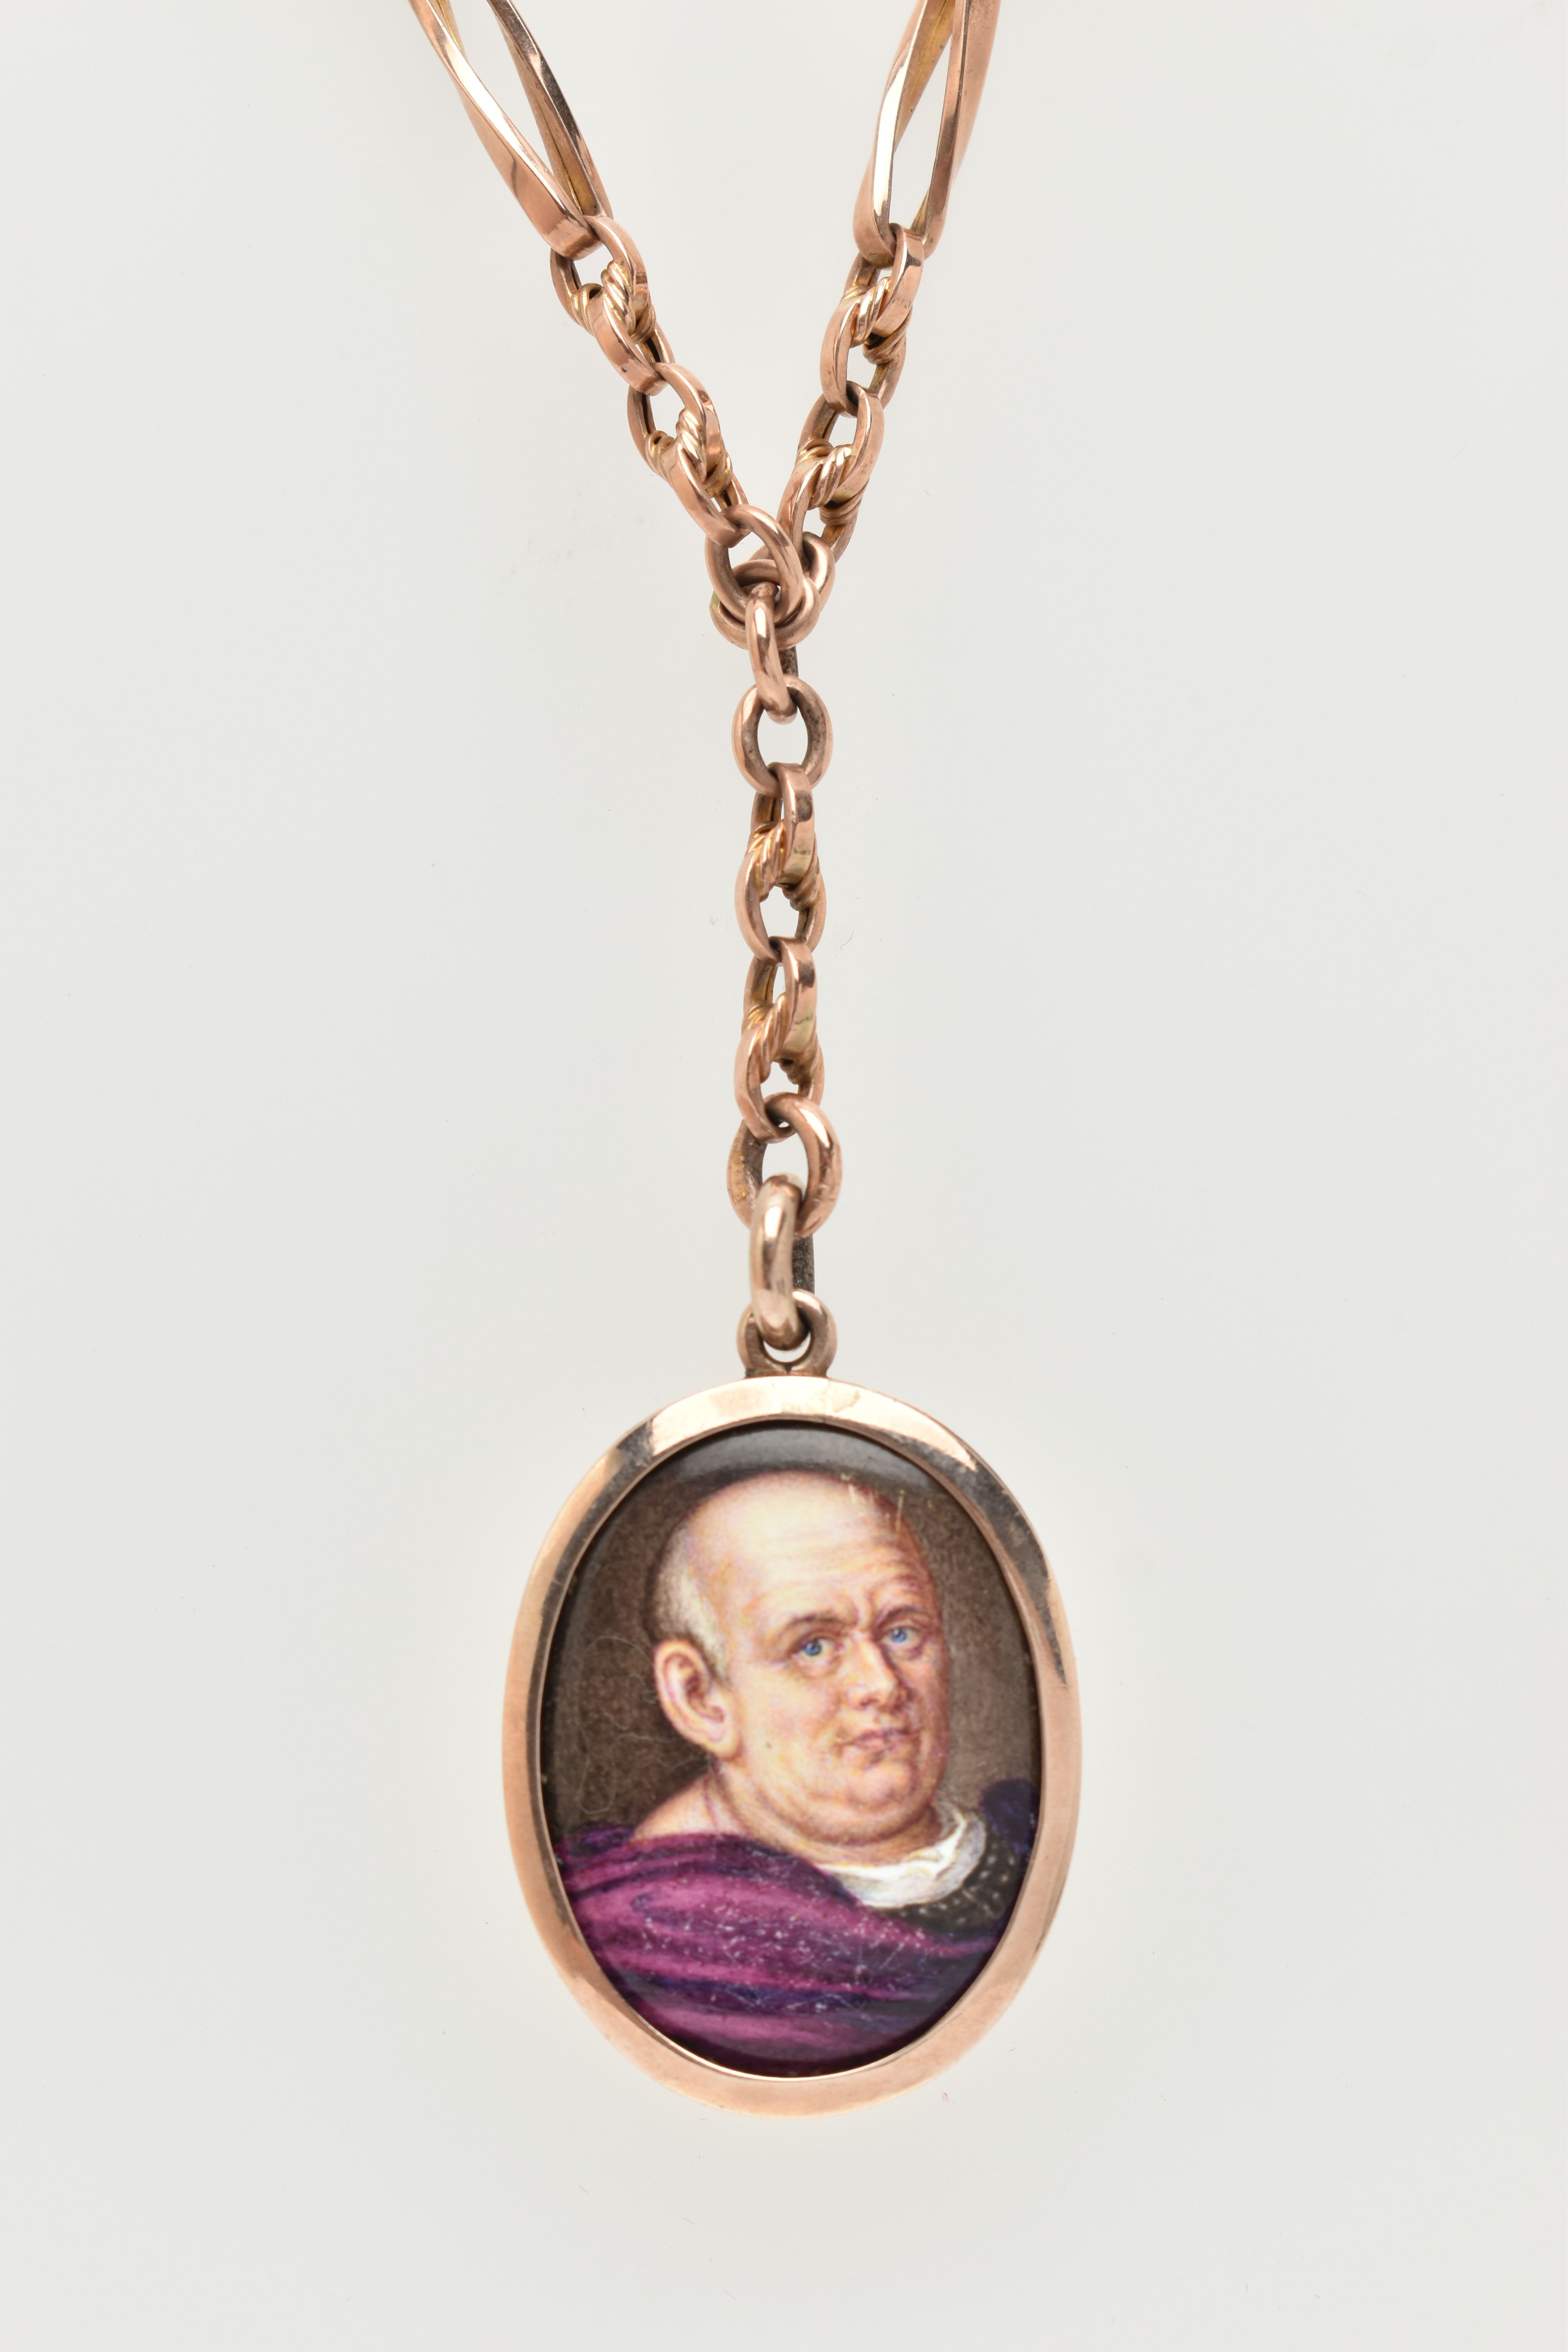 AN EARLY 20TH CENTURY MINIATURE PORTRAIT PENDANT AND CHAIN, the oval enamel pendant depicting a